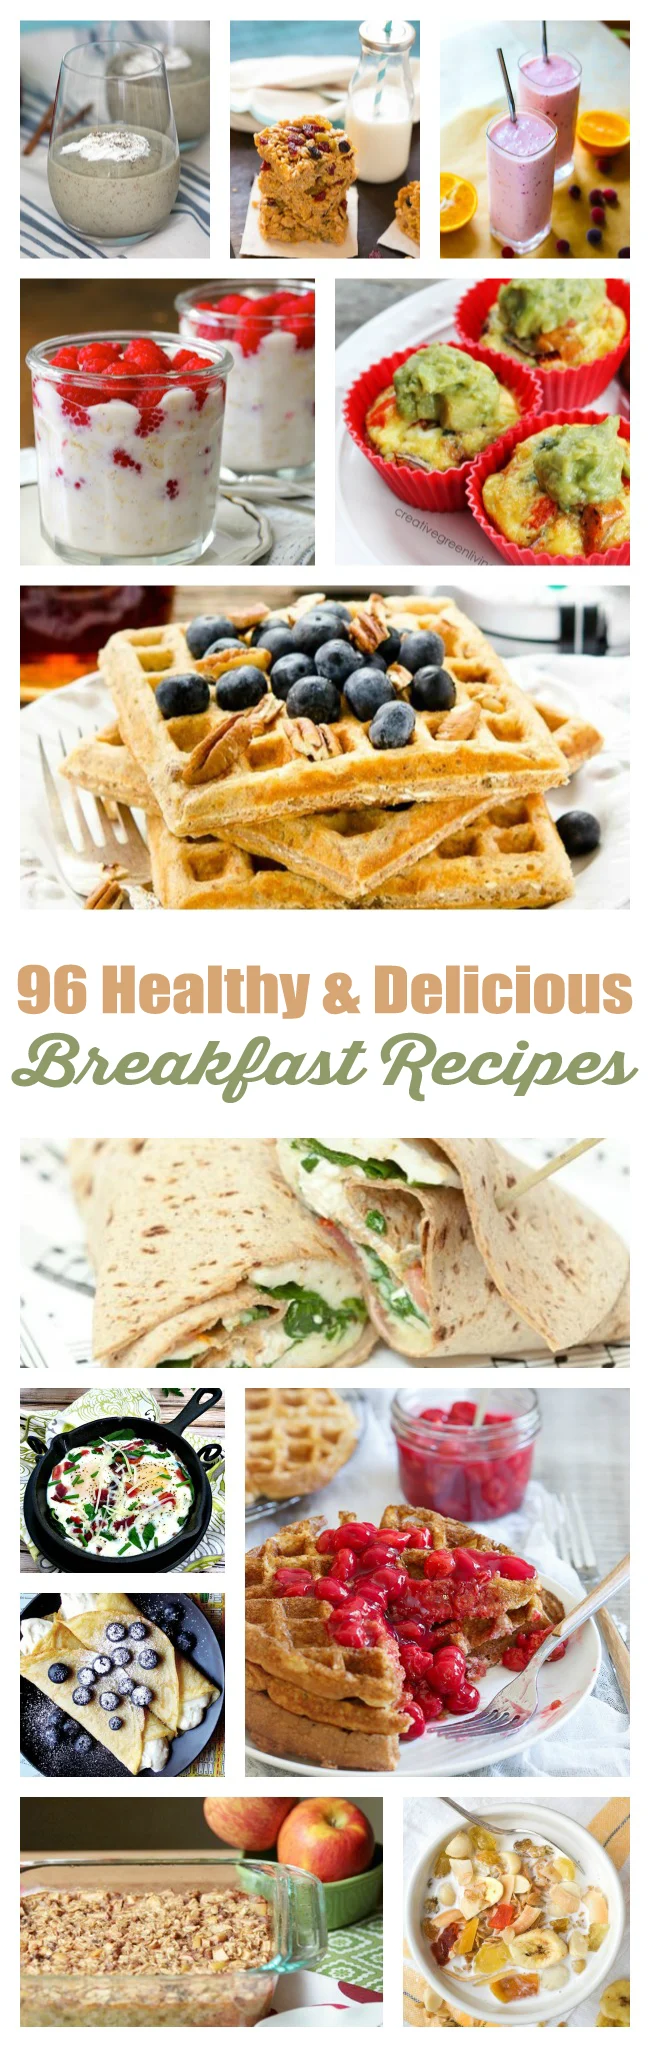 https://cutefetti.com/wp-content/uploads/2015/12/96-Healthy-Delicious-Breakfast-Recipes.png.webp